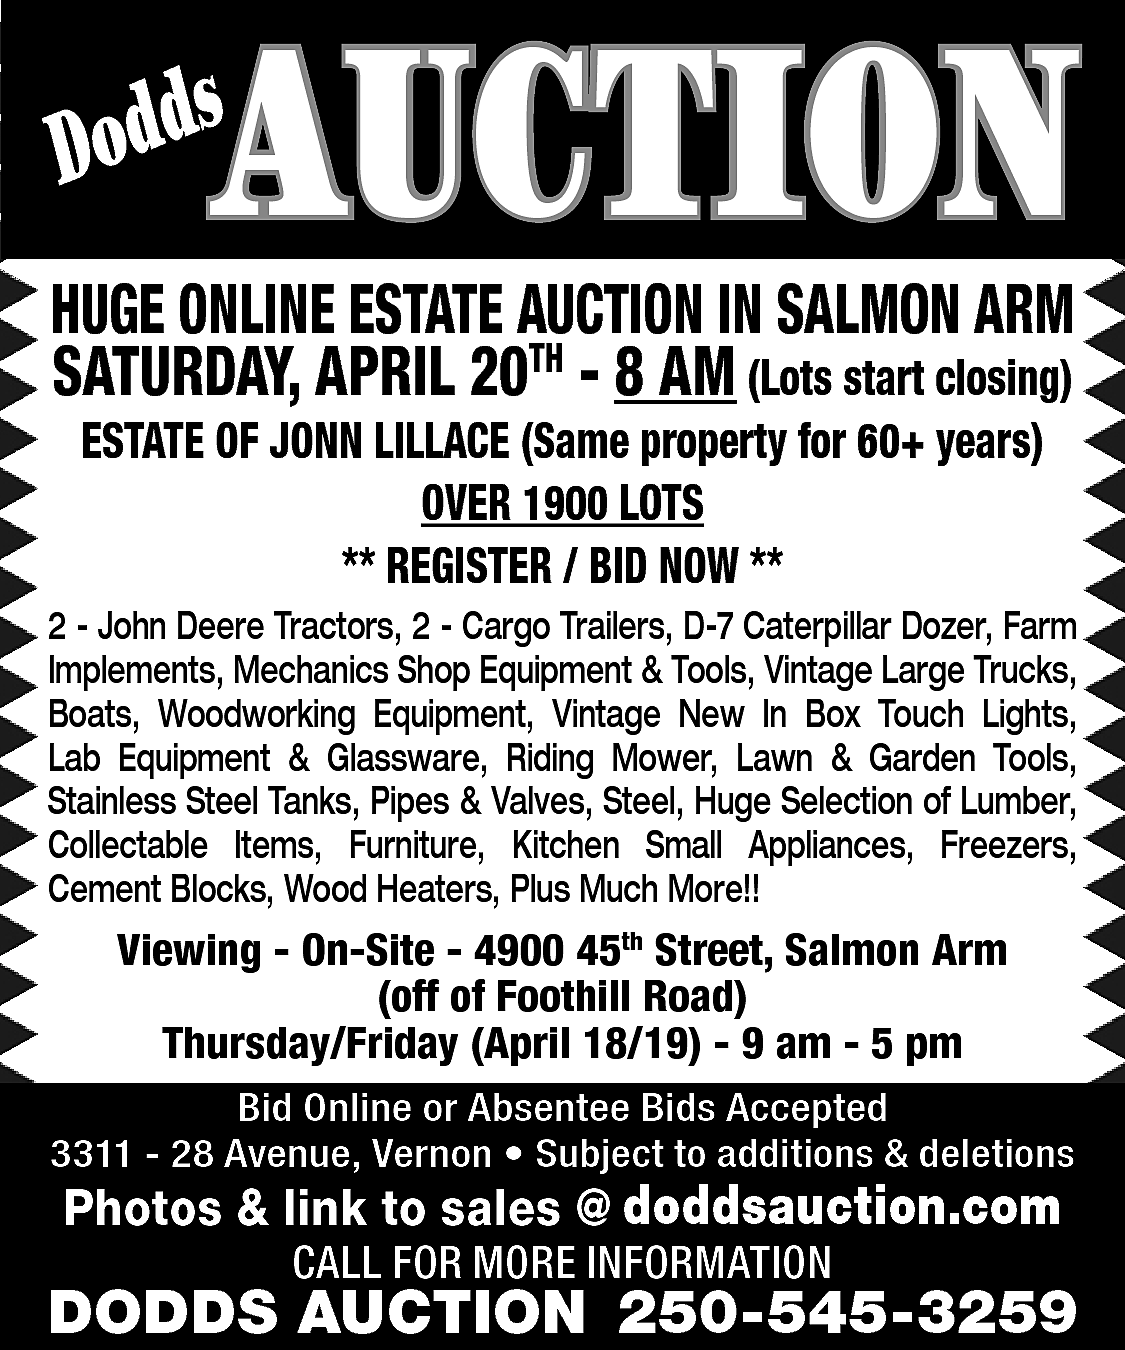 AUCTION <br> <br>s <br>Dodd <br>  AUCTION    s  Dodd    HUGE ONLINE ESTATE AUCTION IN SALMON ARM  SATURDAY, APRIL 20TH - 8 AM (Lots start closing)  ESTATE OF JONN LILLACE (Same property for 60+ years)  OVER 1900 LOTS  ** REGISTER / BID NOW **    2 - John Deere Tractors, 2 - Cargo Trailers, D-7 Caterpillar Dozer, Farm  Implements, Mechanics Shop Equipment & Tools, Vintage Large Trucks,  Boats, Woodworking Equipment, Vintage New In Box Touch Lights,  Lab Equipment & Glassware, Riding Mower, Lawn & Garden Tools,  Stainless Steel Tanks, Pipes & Valves, Steel, Huge Selection of Lumber,  Collectable Items, Furniture, Kitchen Small Appliances, Freezers,  Cement Blocks, Wood Heaters, Plus Much More!!    Viewing - On-Site - 4900 45th Street, Salmon Arm  (off of Foothill Road)  Thursday/Friday (April 18/19) - 9 am - 5 pm  Bid Online or Absentee Bids Accepted  3311 - 28 Avenue, Vernon • Subject to additions & deletions    www.doddsauction.com  Photos & link to sales @  doddsauction.com  CALL FOR MORE INFORMATION    DODDS AUCTION 250-545-3259    